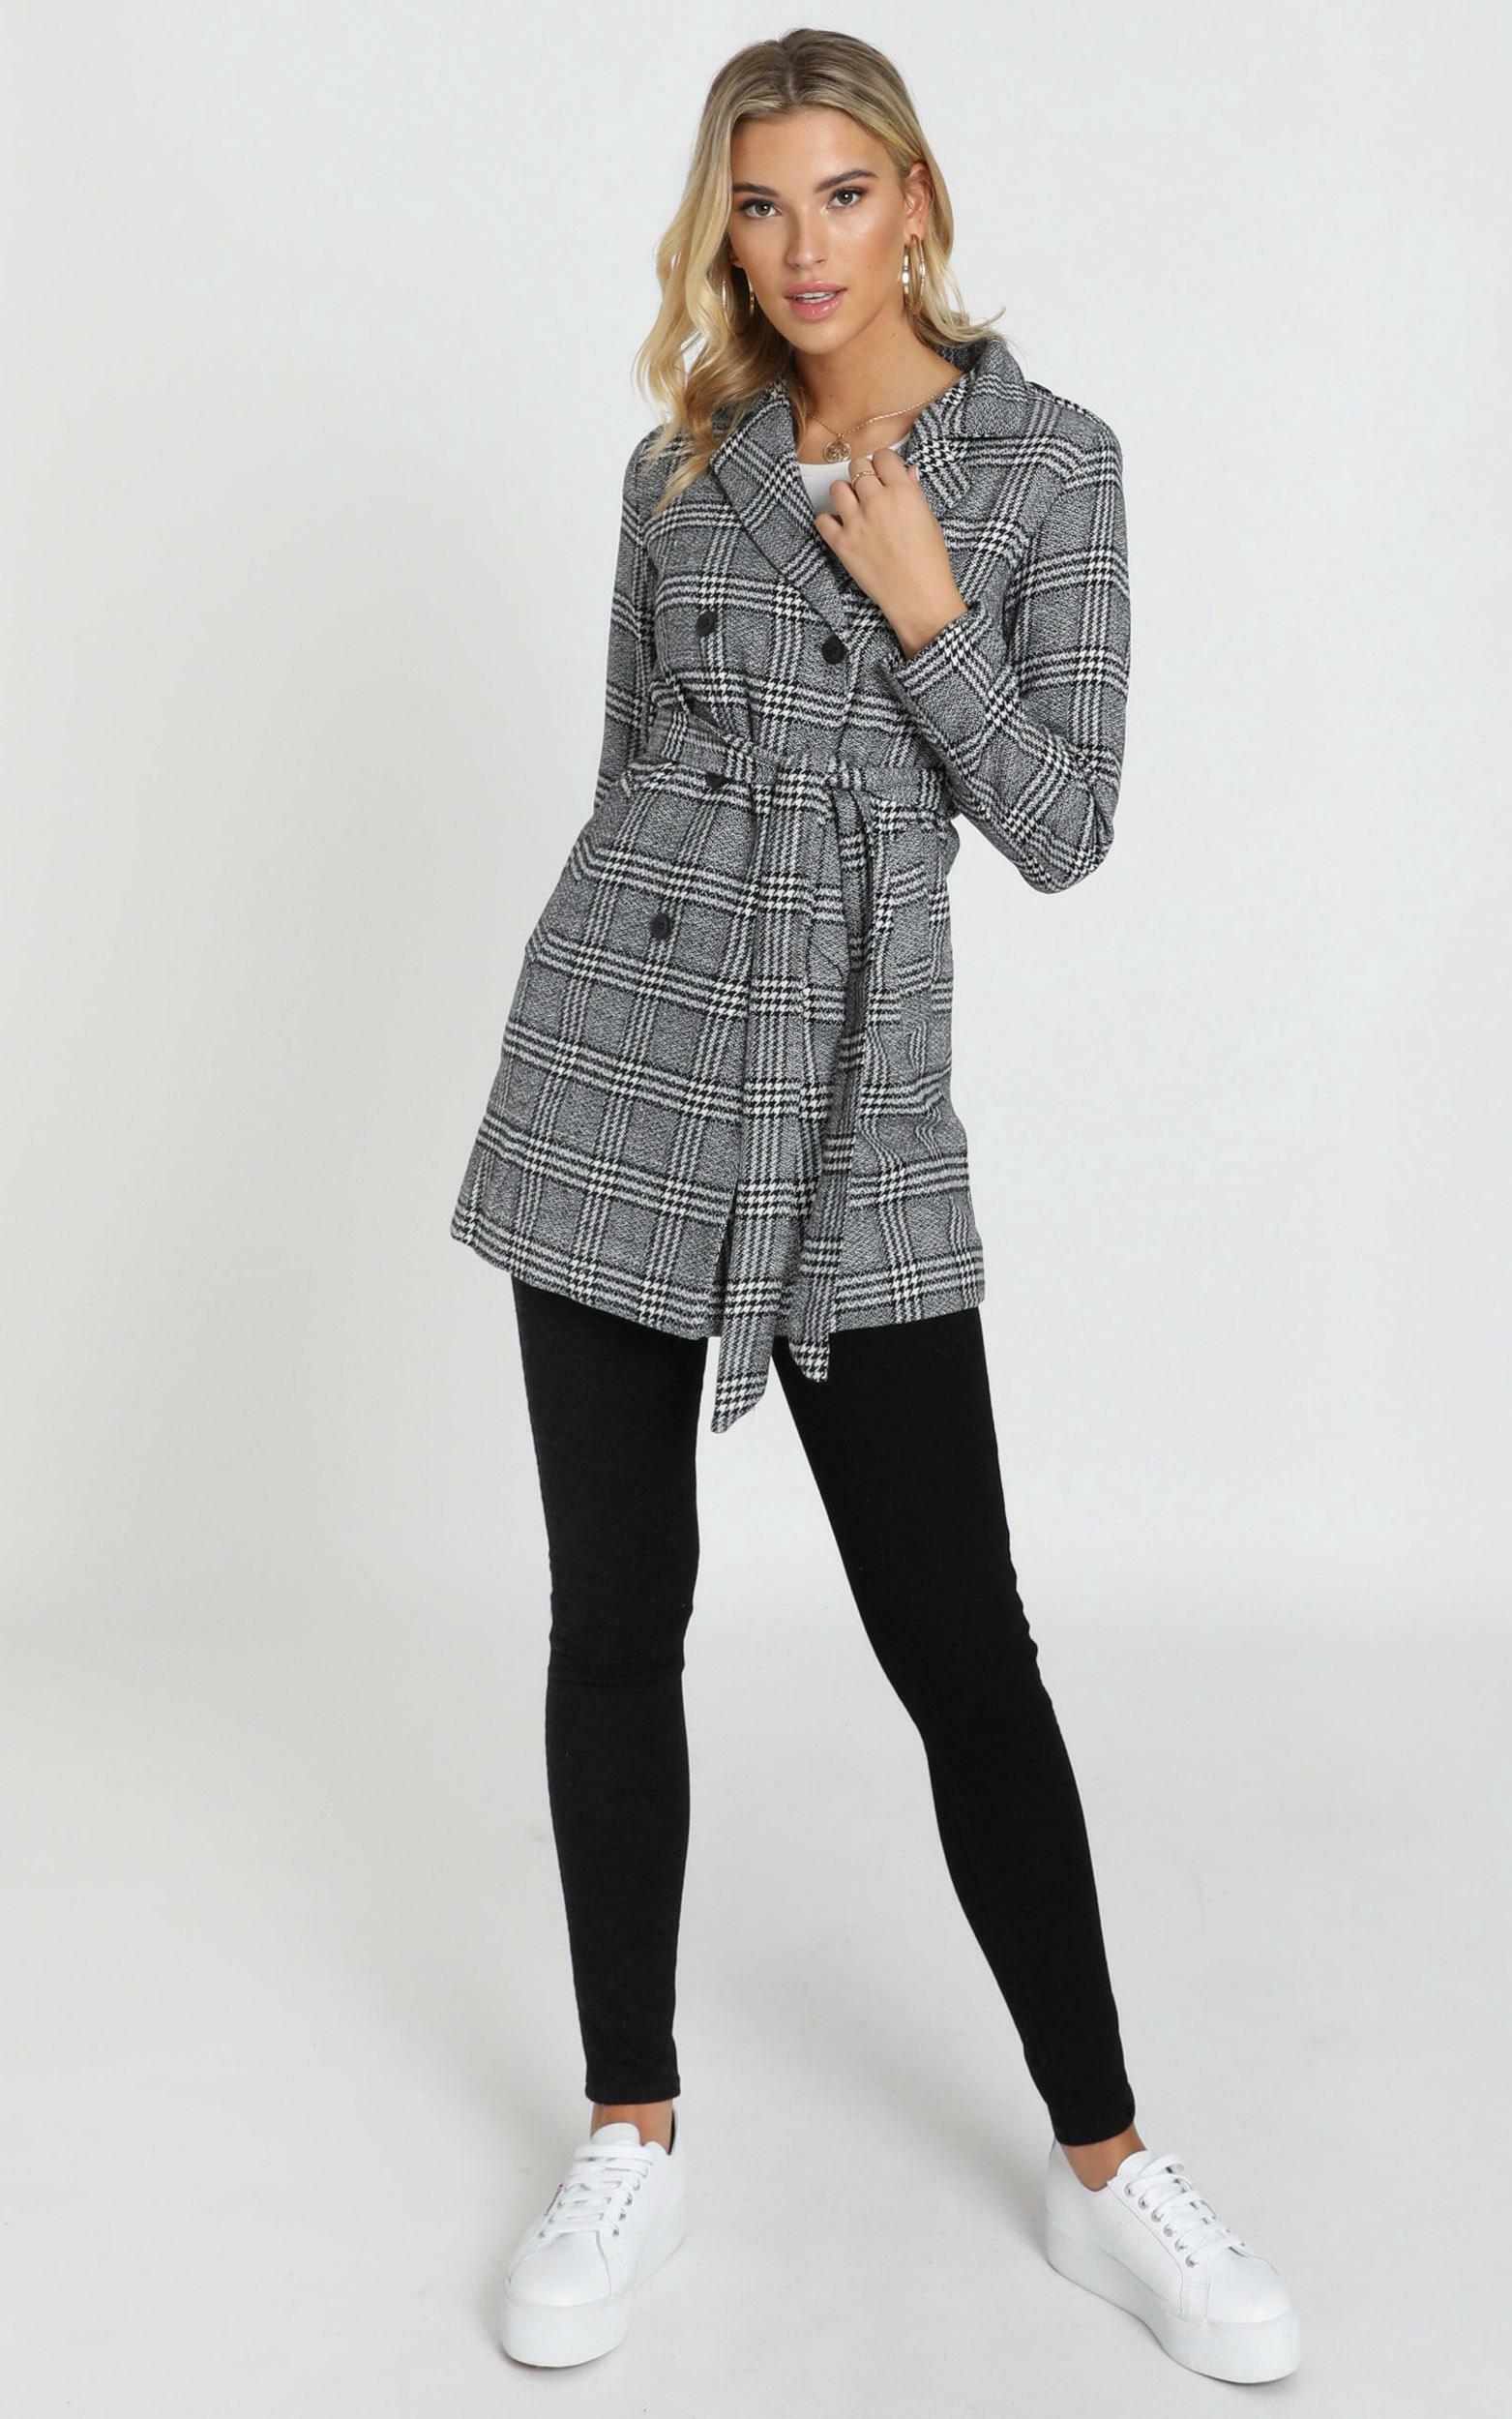 Stay Beside Me coat in grey check - 8 (S), Grey, hi-res image number null